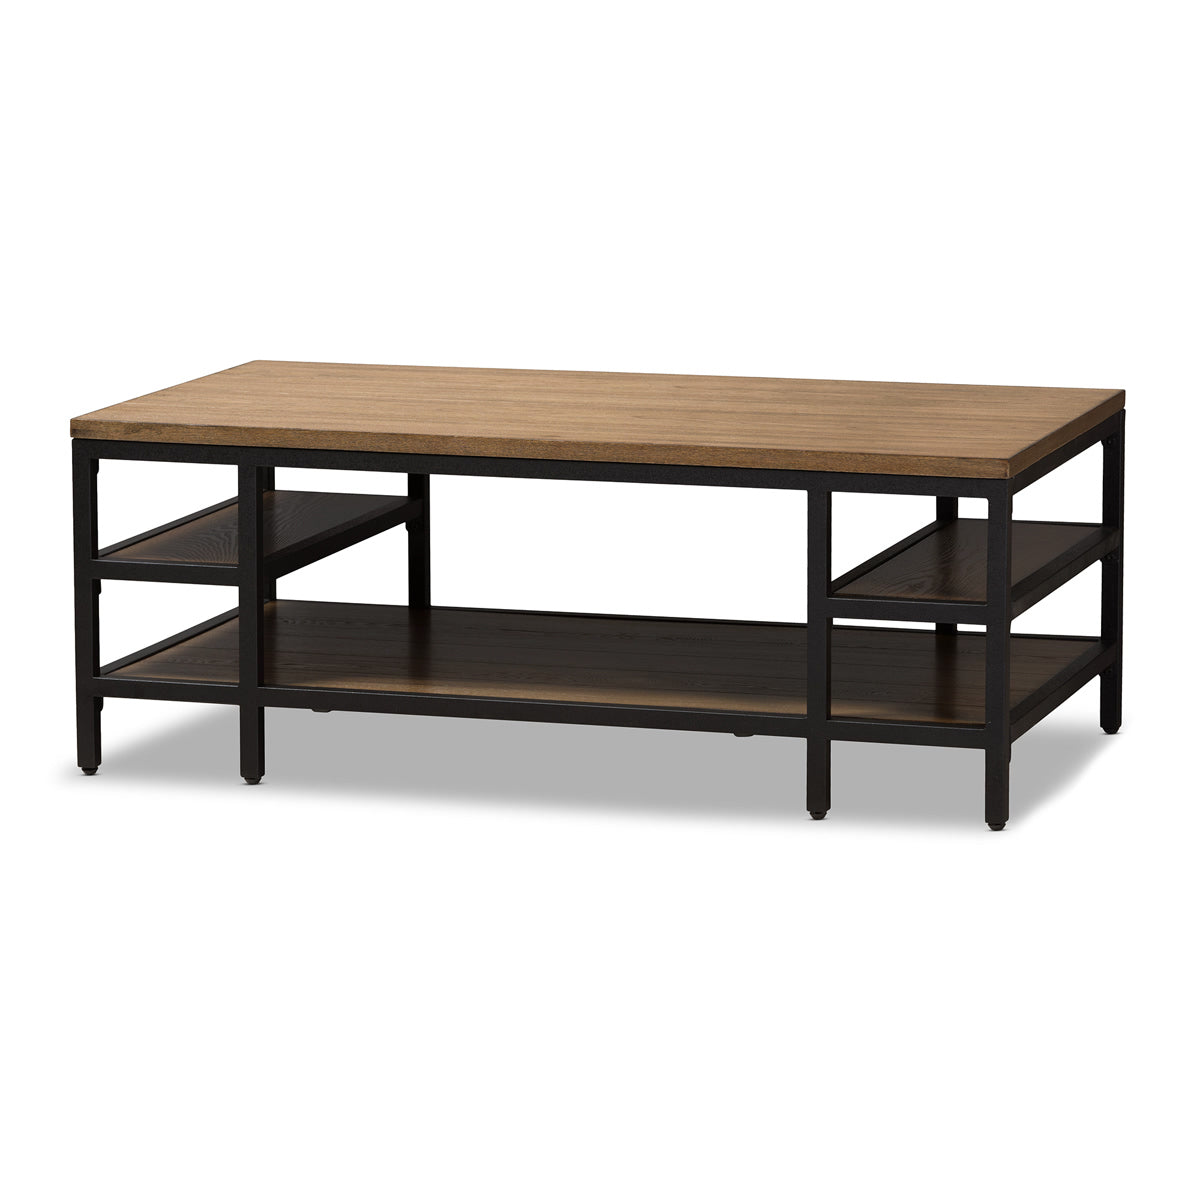 Baxton Studio Caribou Rustic Industrial Style Oak Brown Finished Wood and Black Finished Metal Coffee Table Baxton Studio-coffee tables-Minimal And Modern - 1